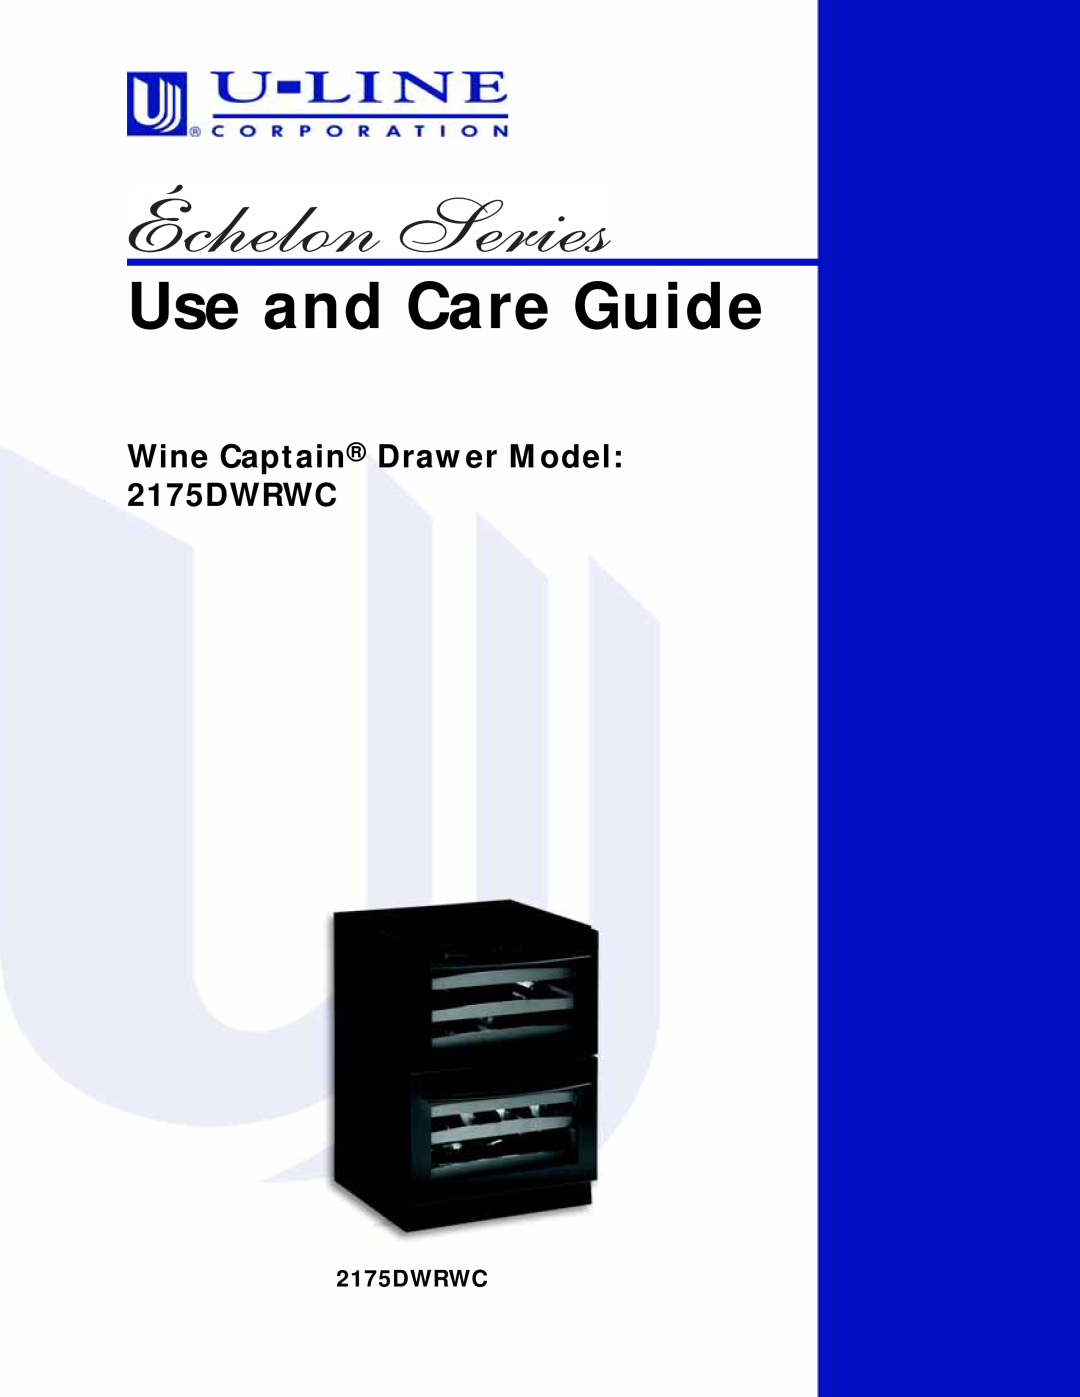 U-Line manual Use and Care Guide, Wine Captain Drawer Model 2175DWRWC 